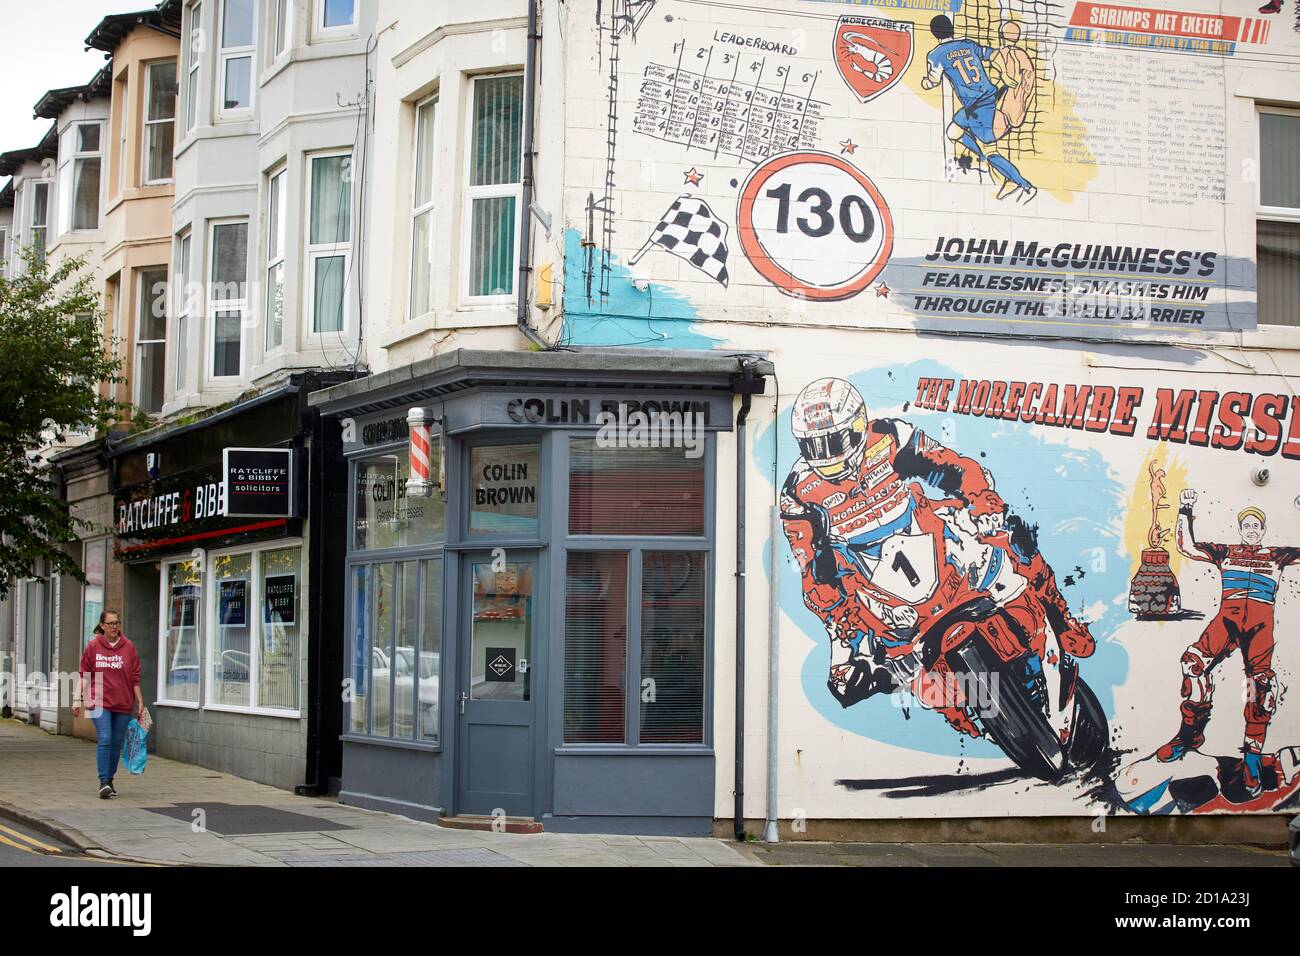 Morecambe bay Lancashire  John McGuinness ‘The Morecambe Missile’ Isle of man TT  mural project called Victoria Press by illustrator Ben Tallon Stock Photo